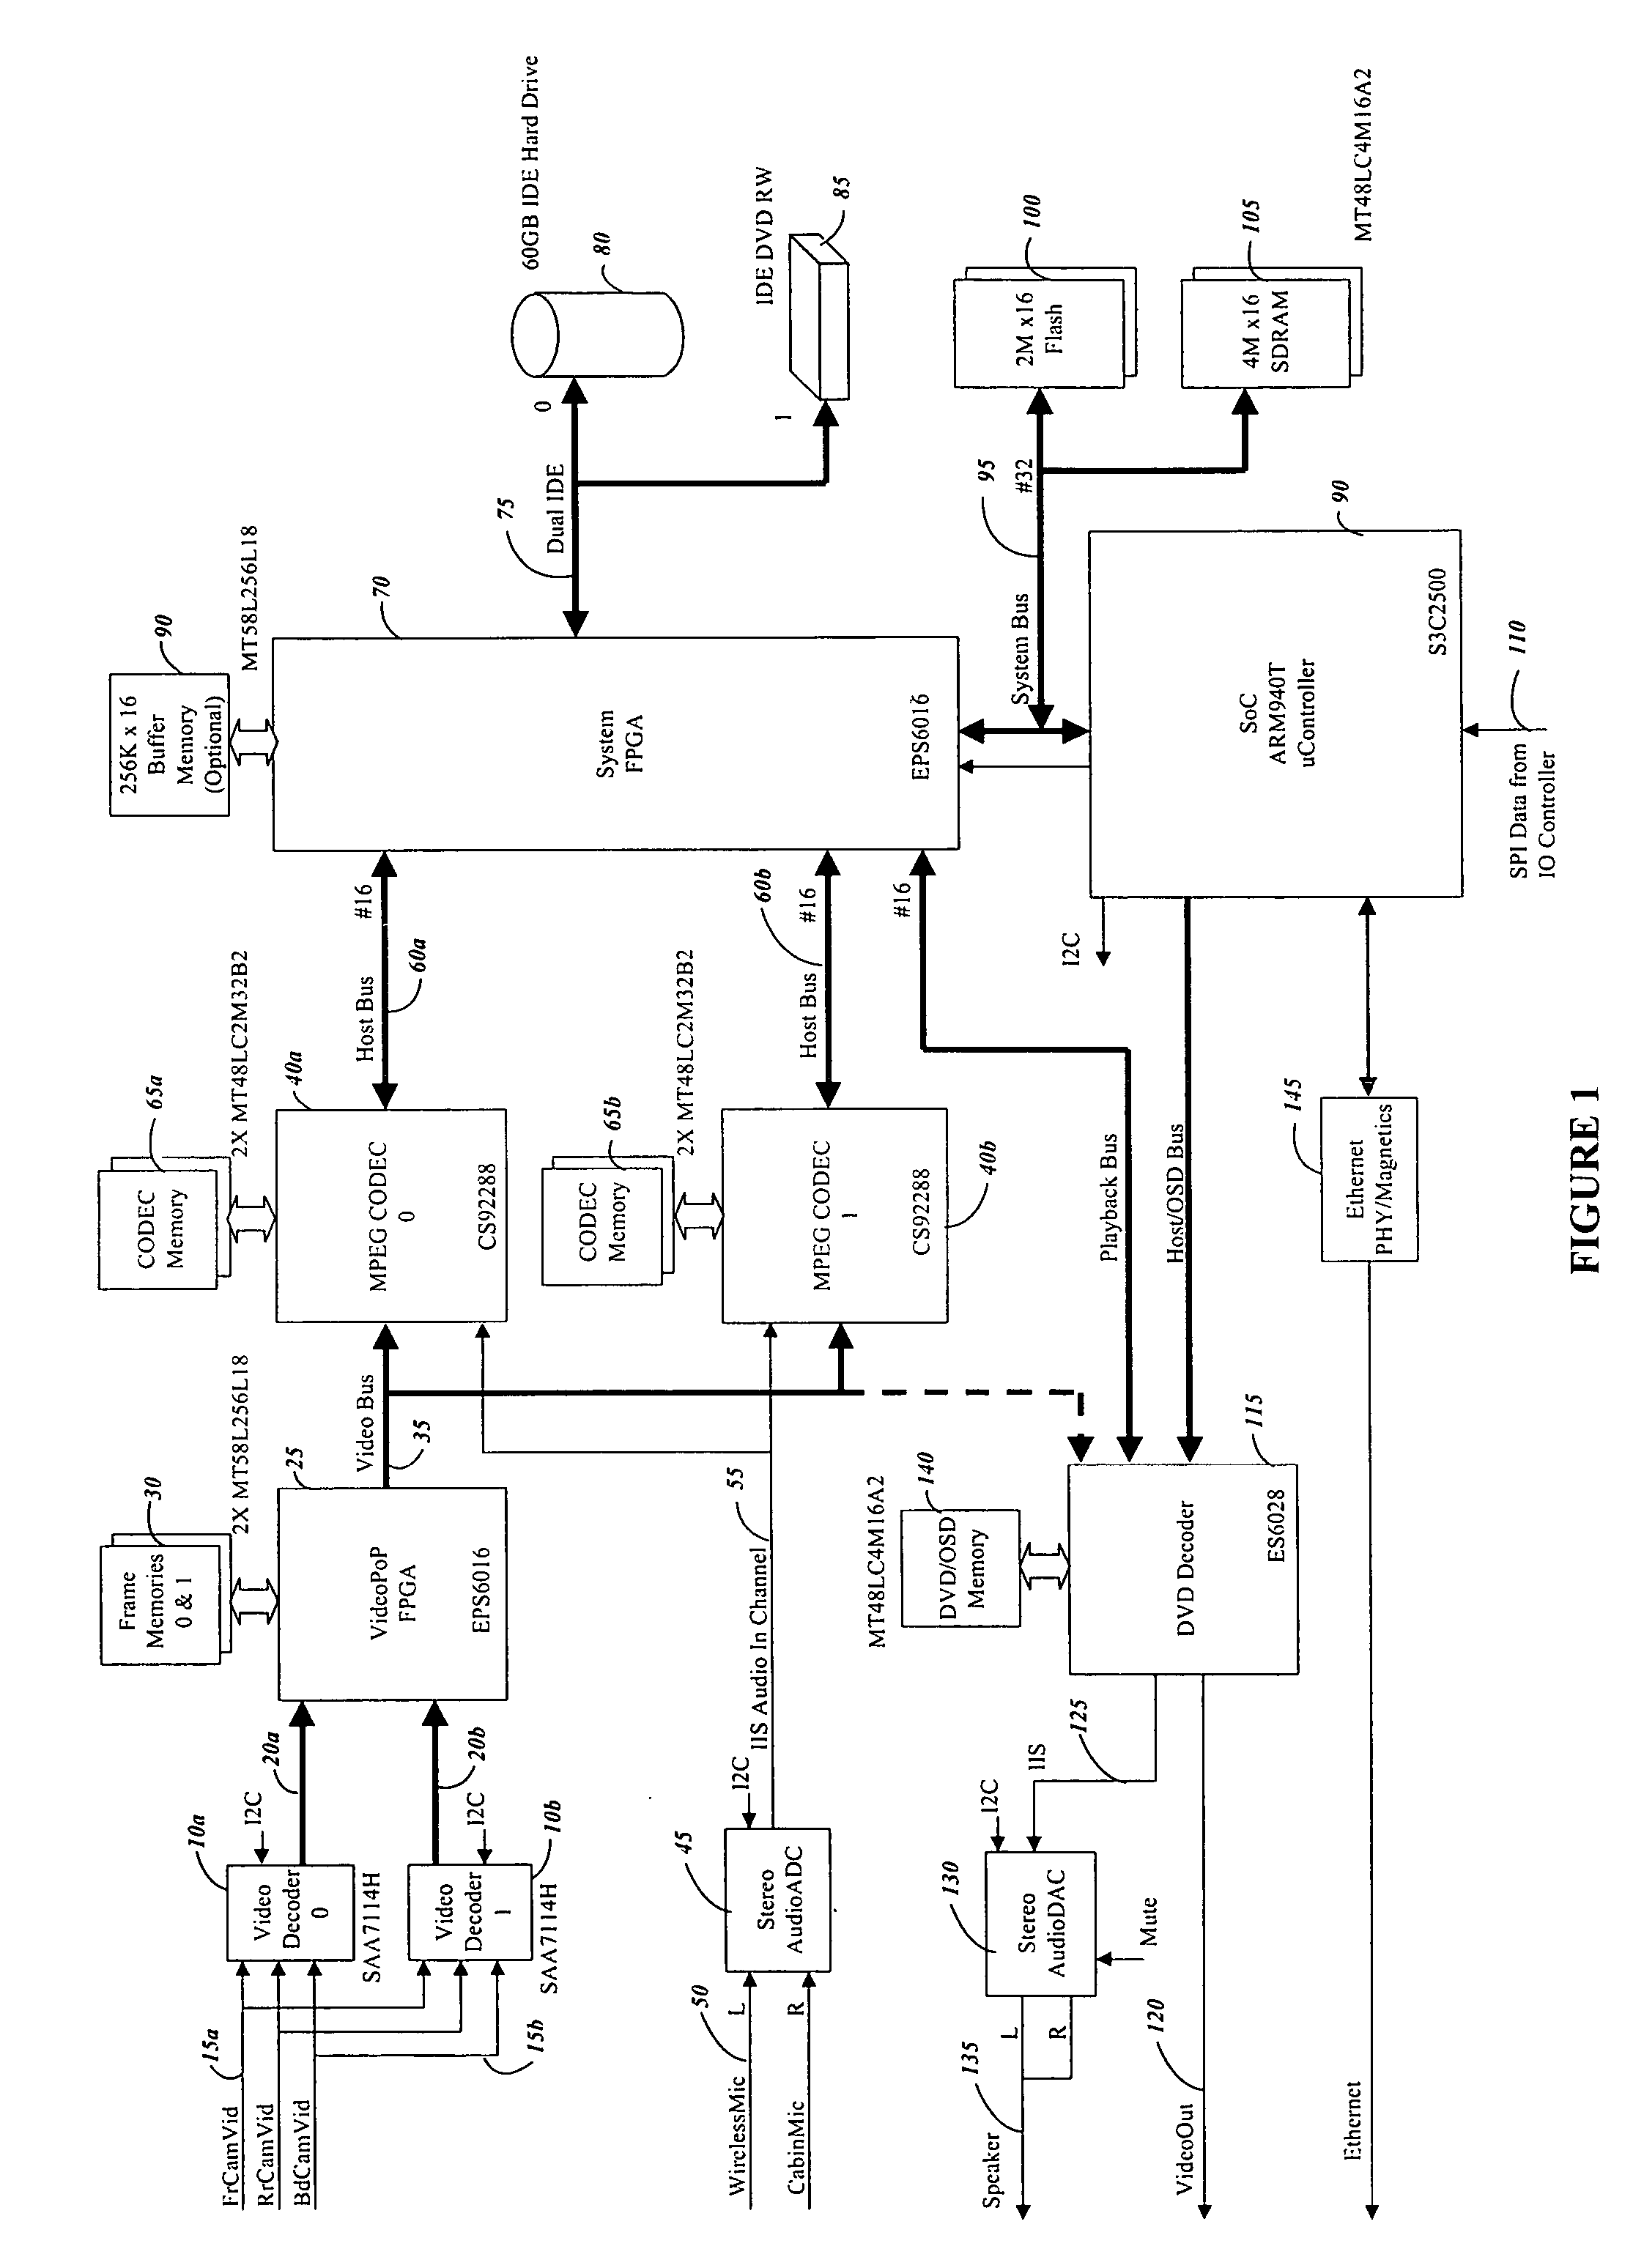 Method of and system for mobile surveillance and event recording